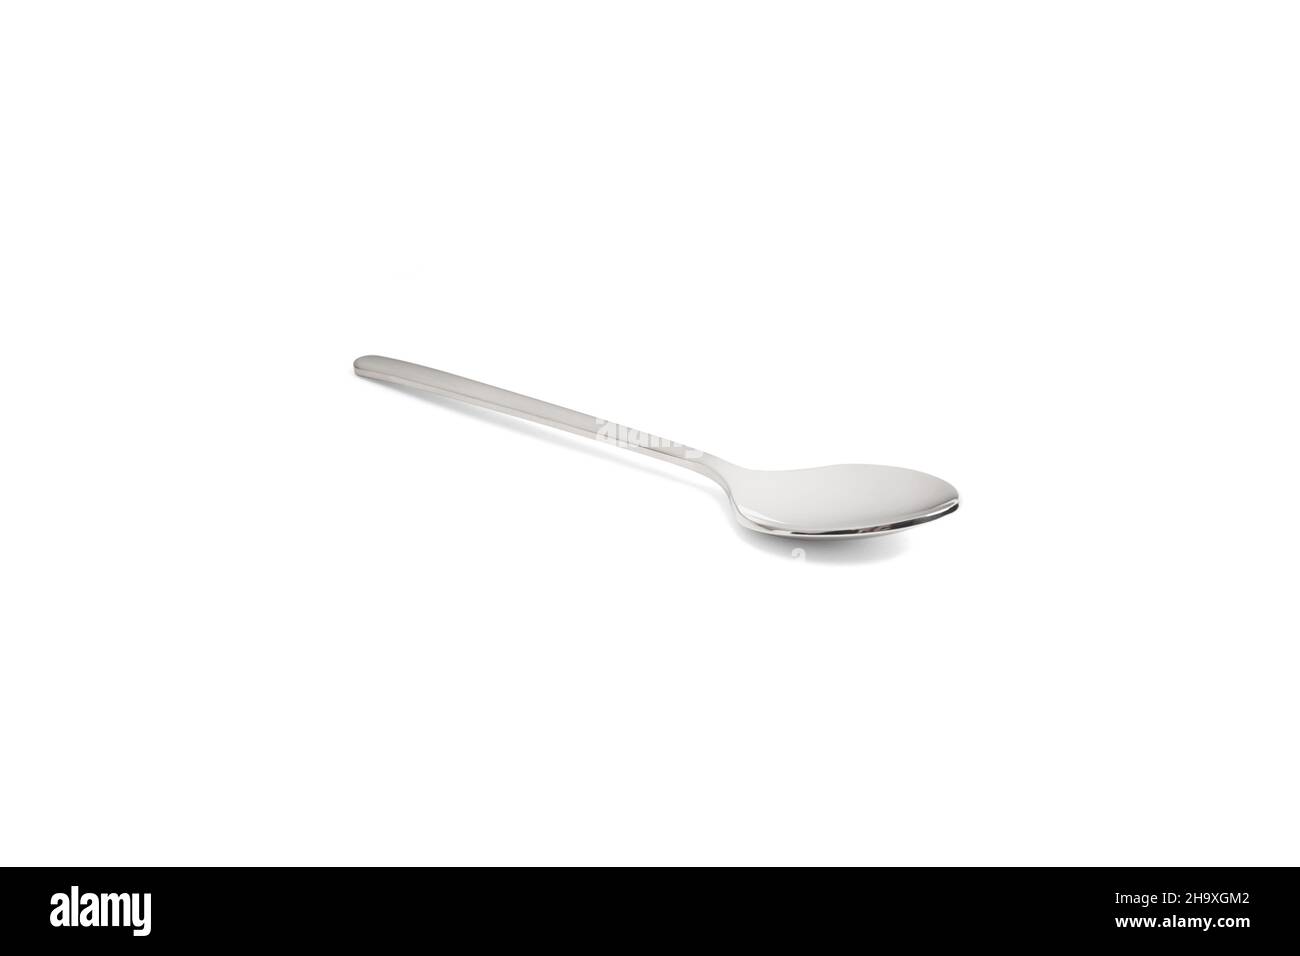 Clean shiny metal spoon isolated on white. Stainless steel small kitchen  dessert teaspoon cut close up. Tablespoon. Kitchen utensils concept. Set of  realistic spoons from different points of view Stock Photo by ©